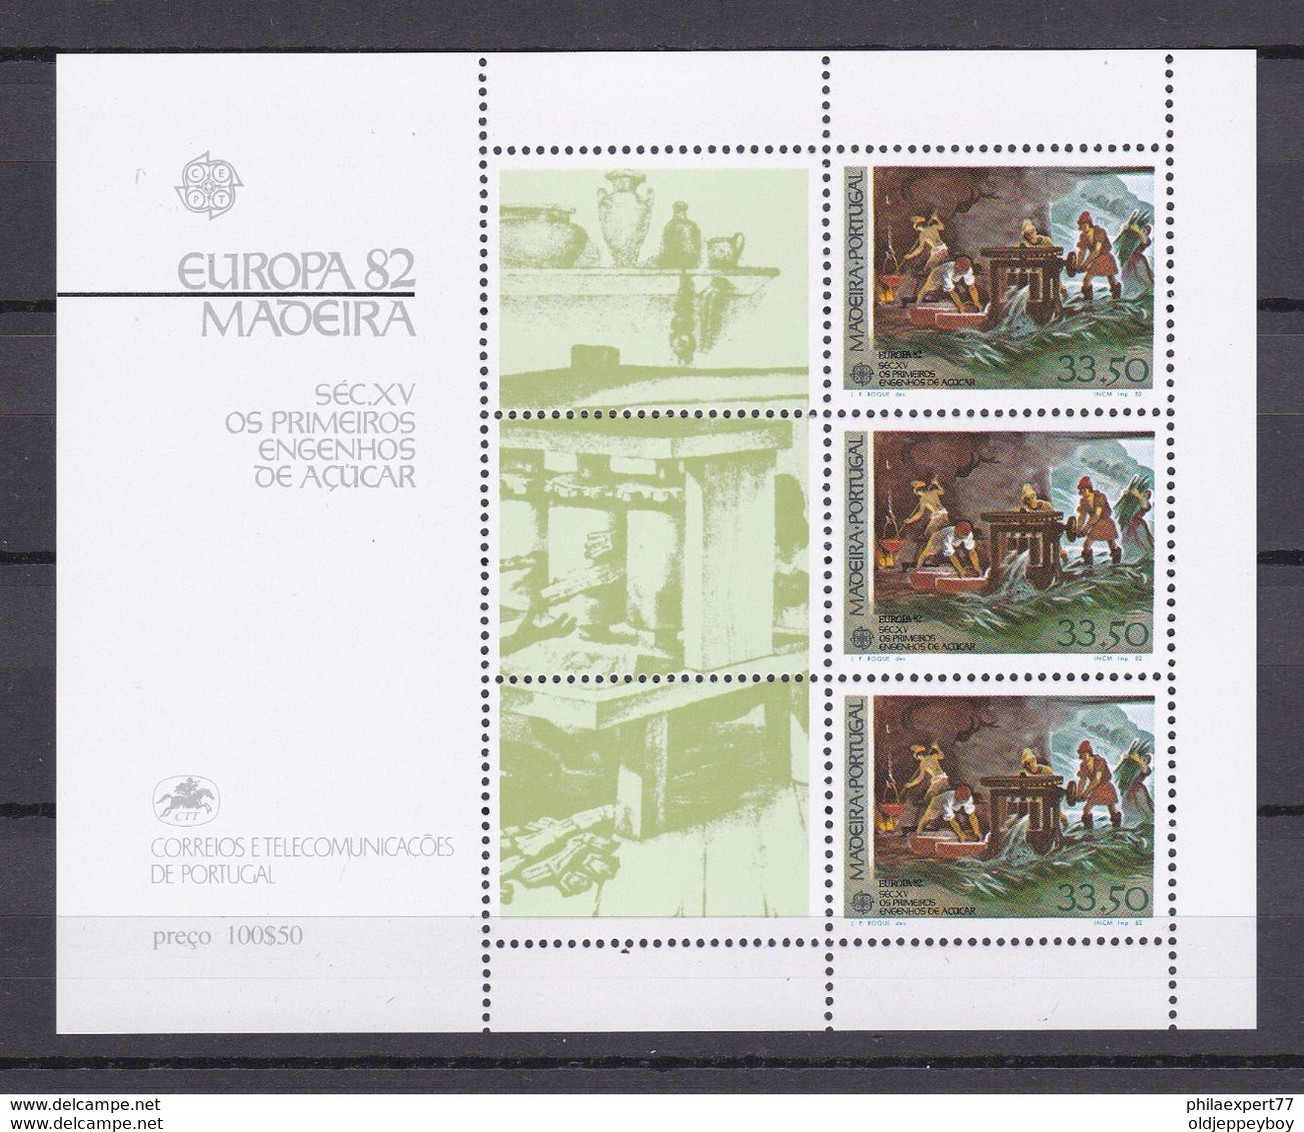 PORTUGAL MADEIRA 1982, SG MS200  Michel Nr. Block 3  Europa, Sugar Mill, MNH Post Office Fresh €7,00 MNH** - Stamp Boxes